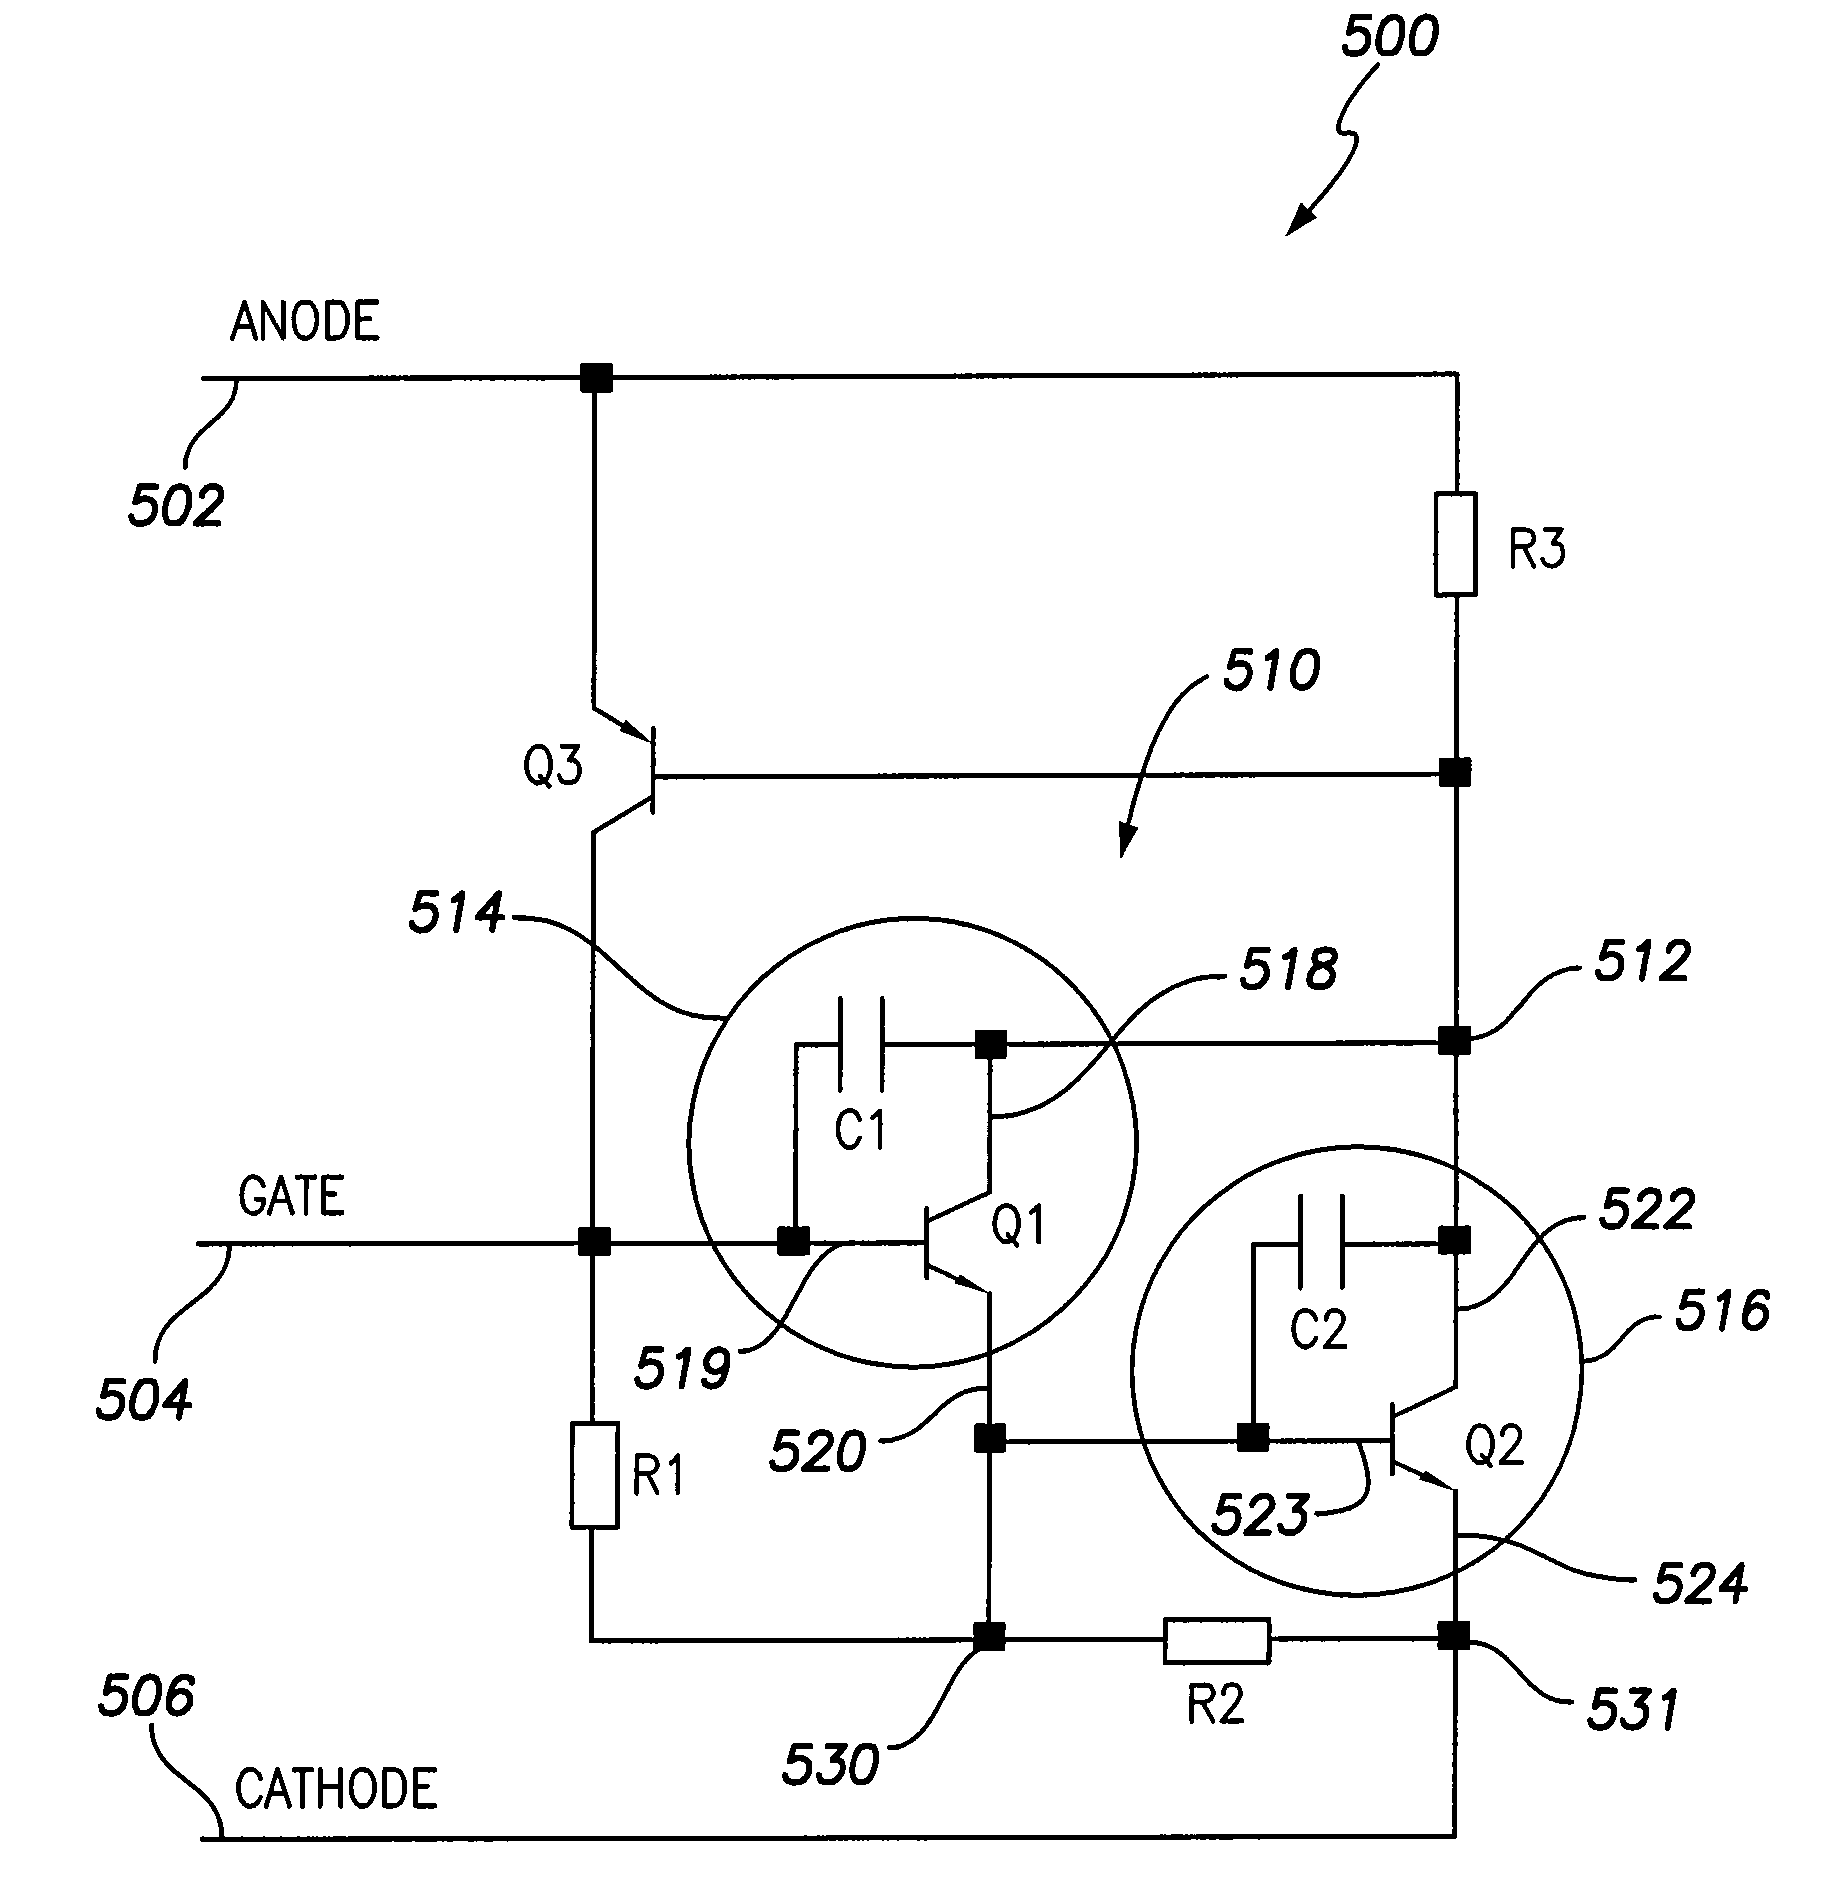 Methods and systems for implementing an SCR topology in a high voltage switching circuit